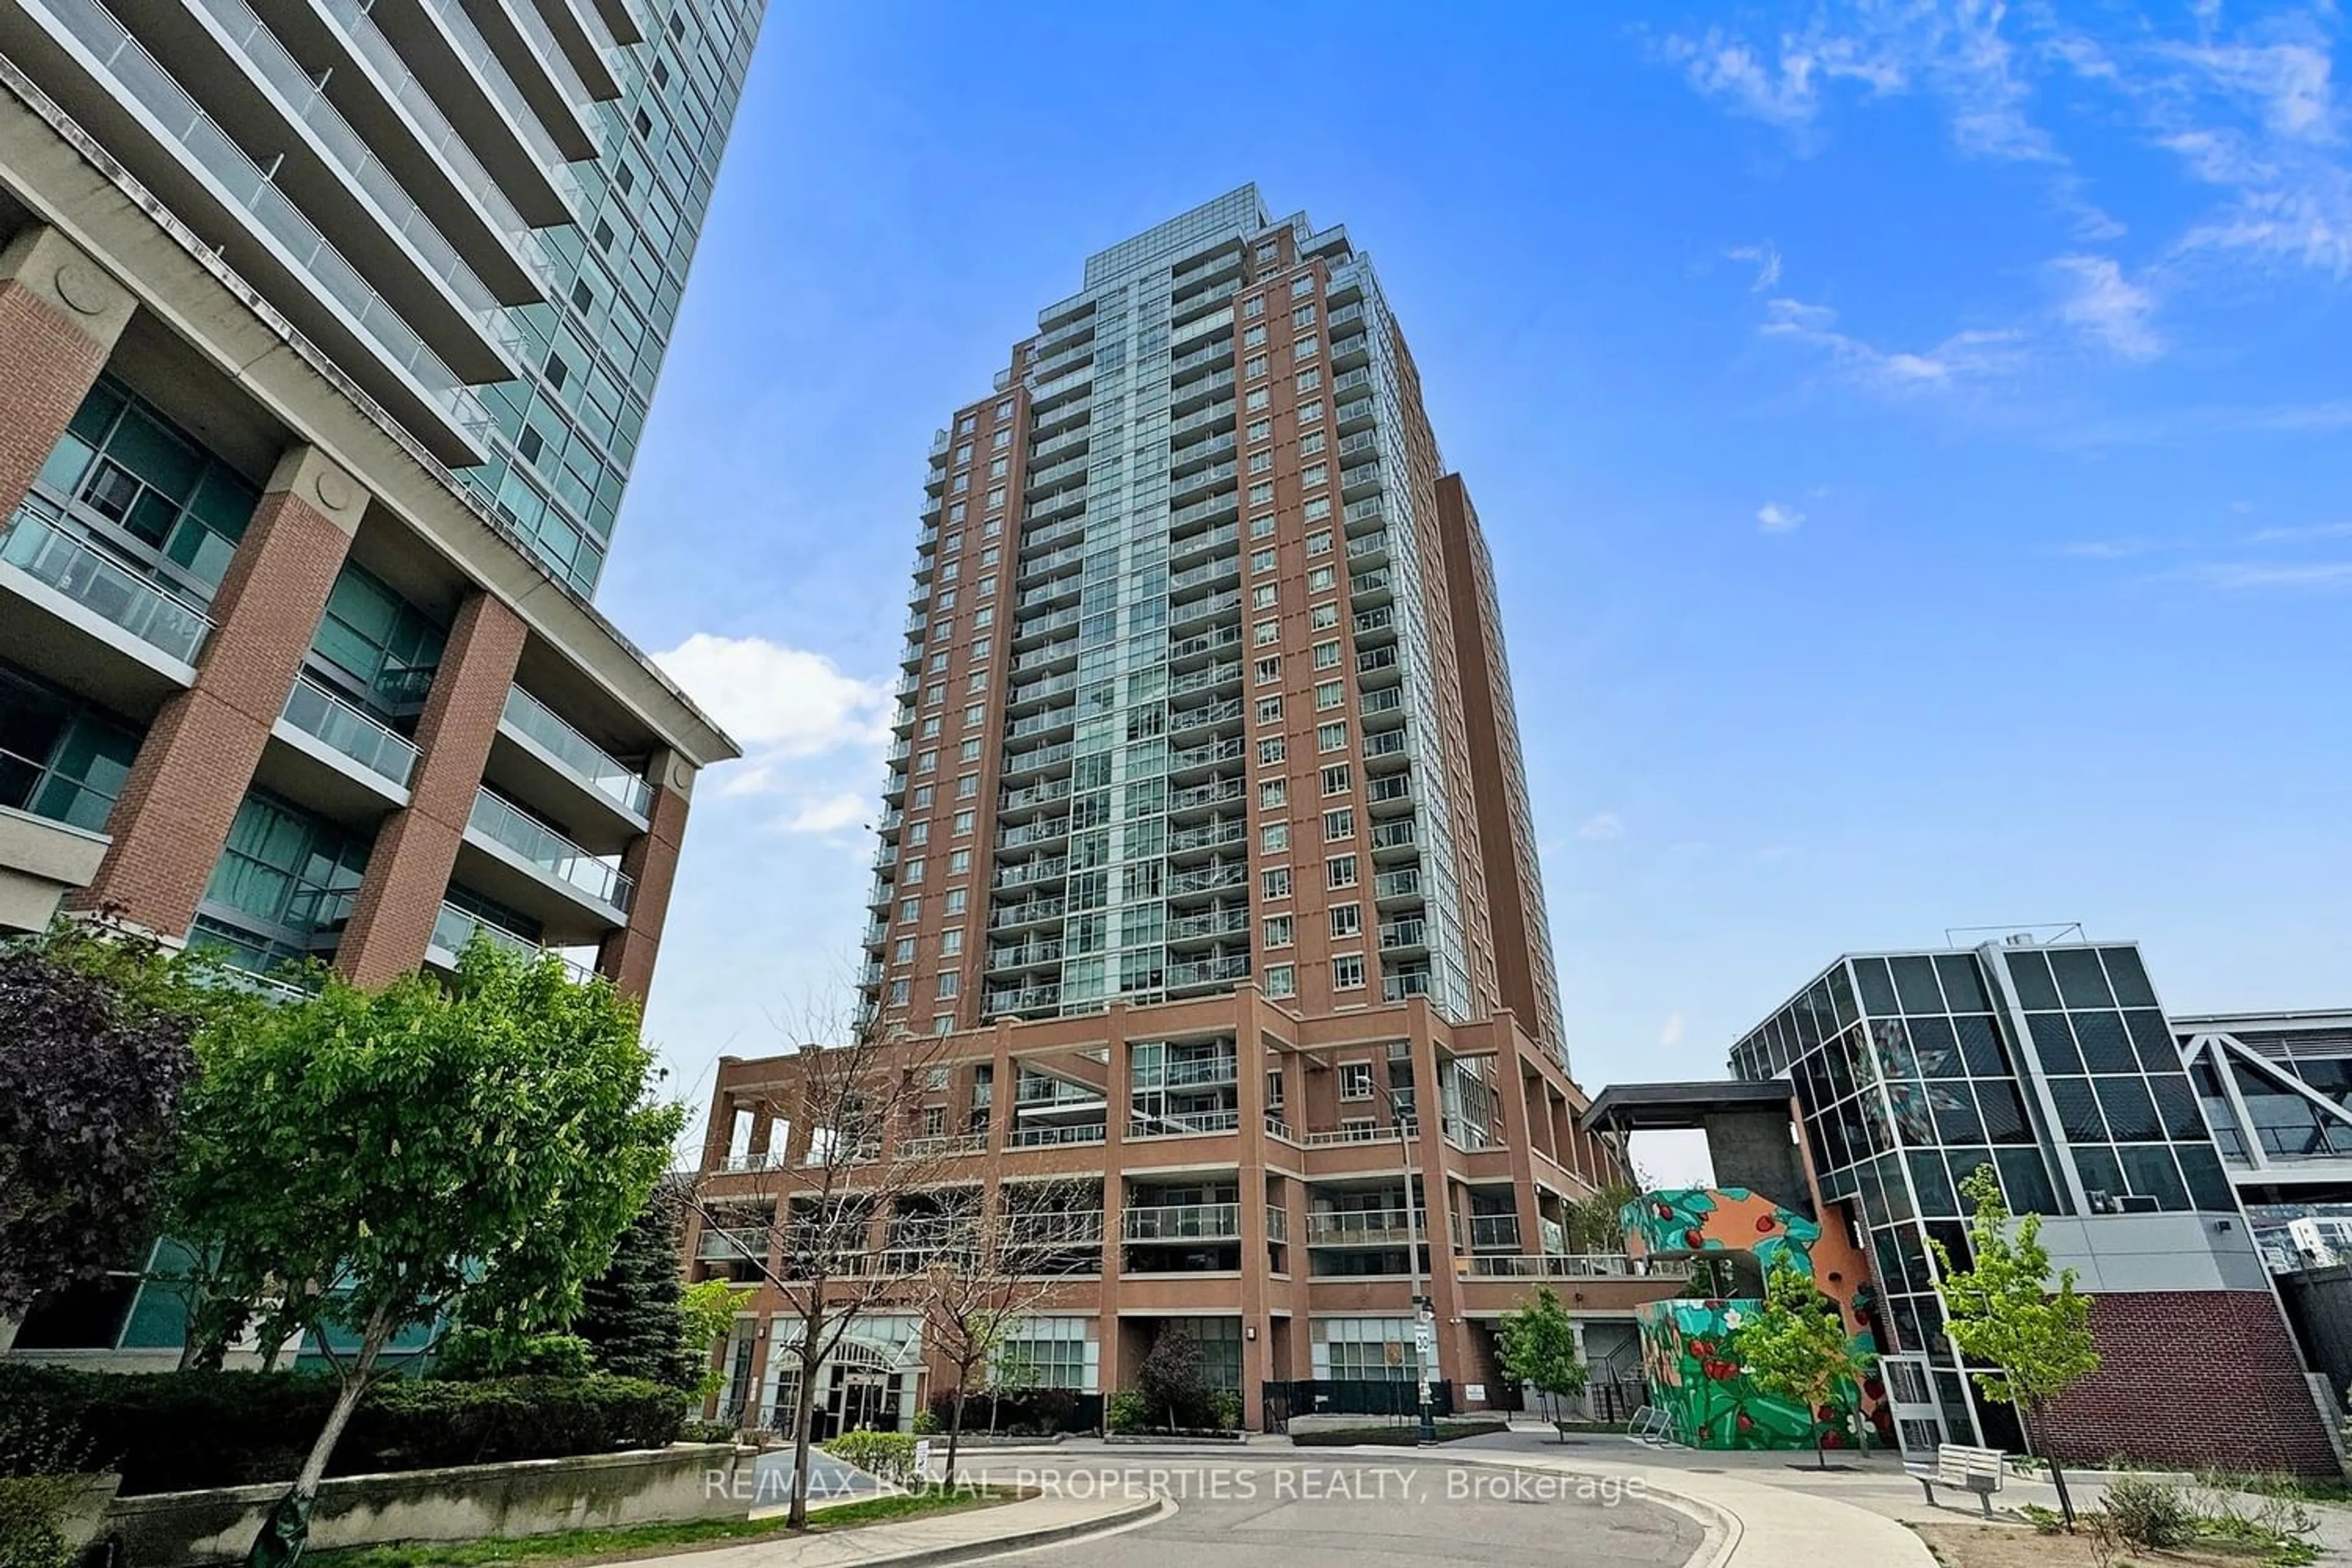 A pic from exterior of the house or condo for 125 Western Battery Rd #1905, Toronto Ontario M6K 3R8